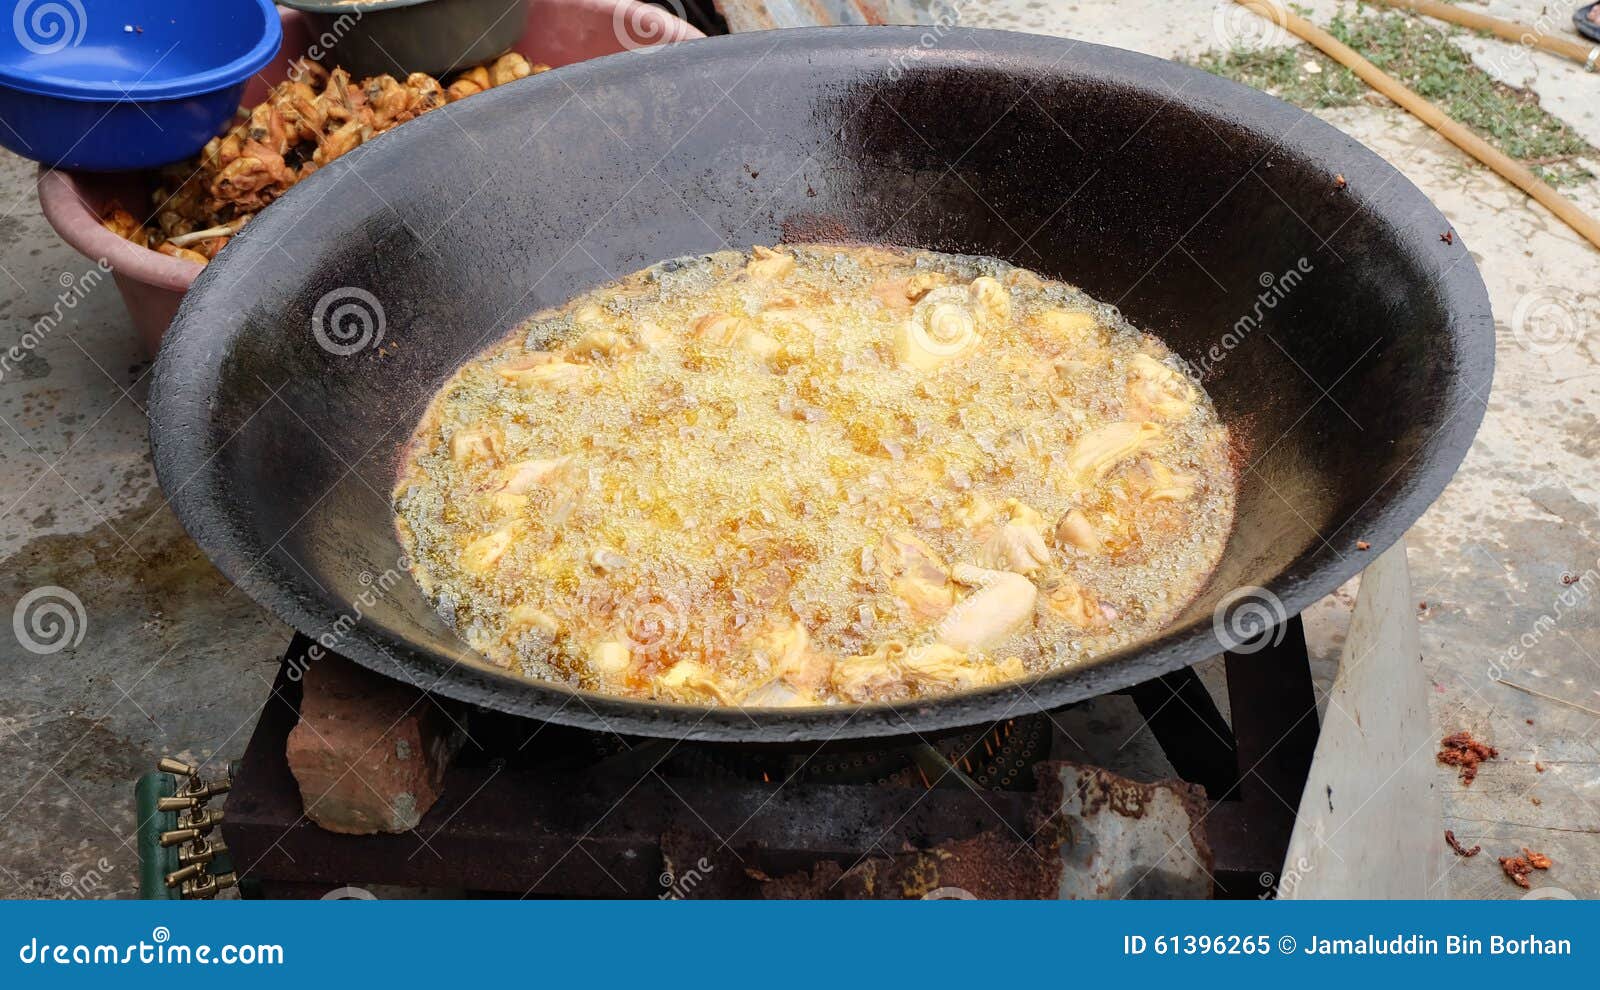 https://thumbs.dreamstime.com/z/giant-frying-pan-typically-used-foods-large-quantities-61396265.jpg